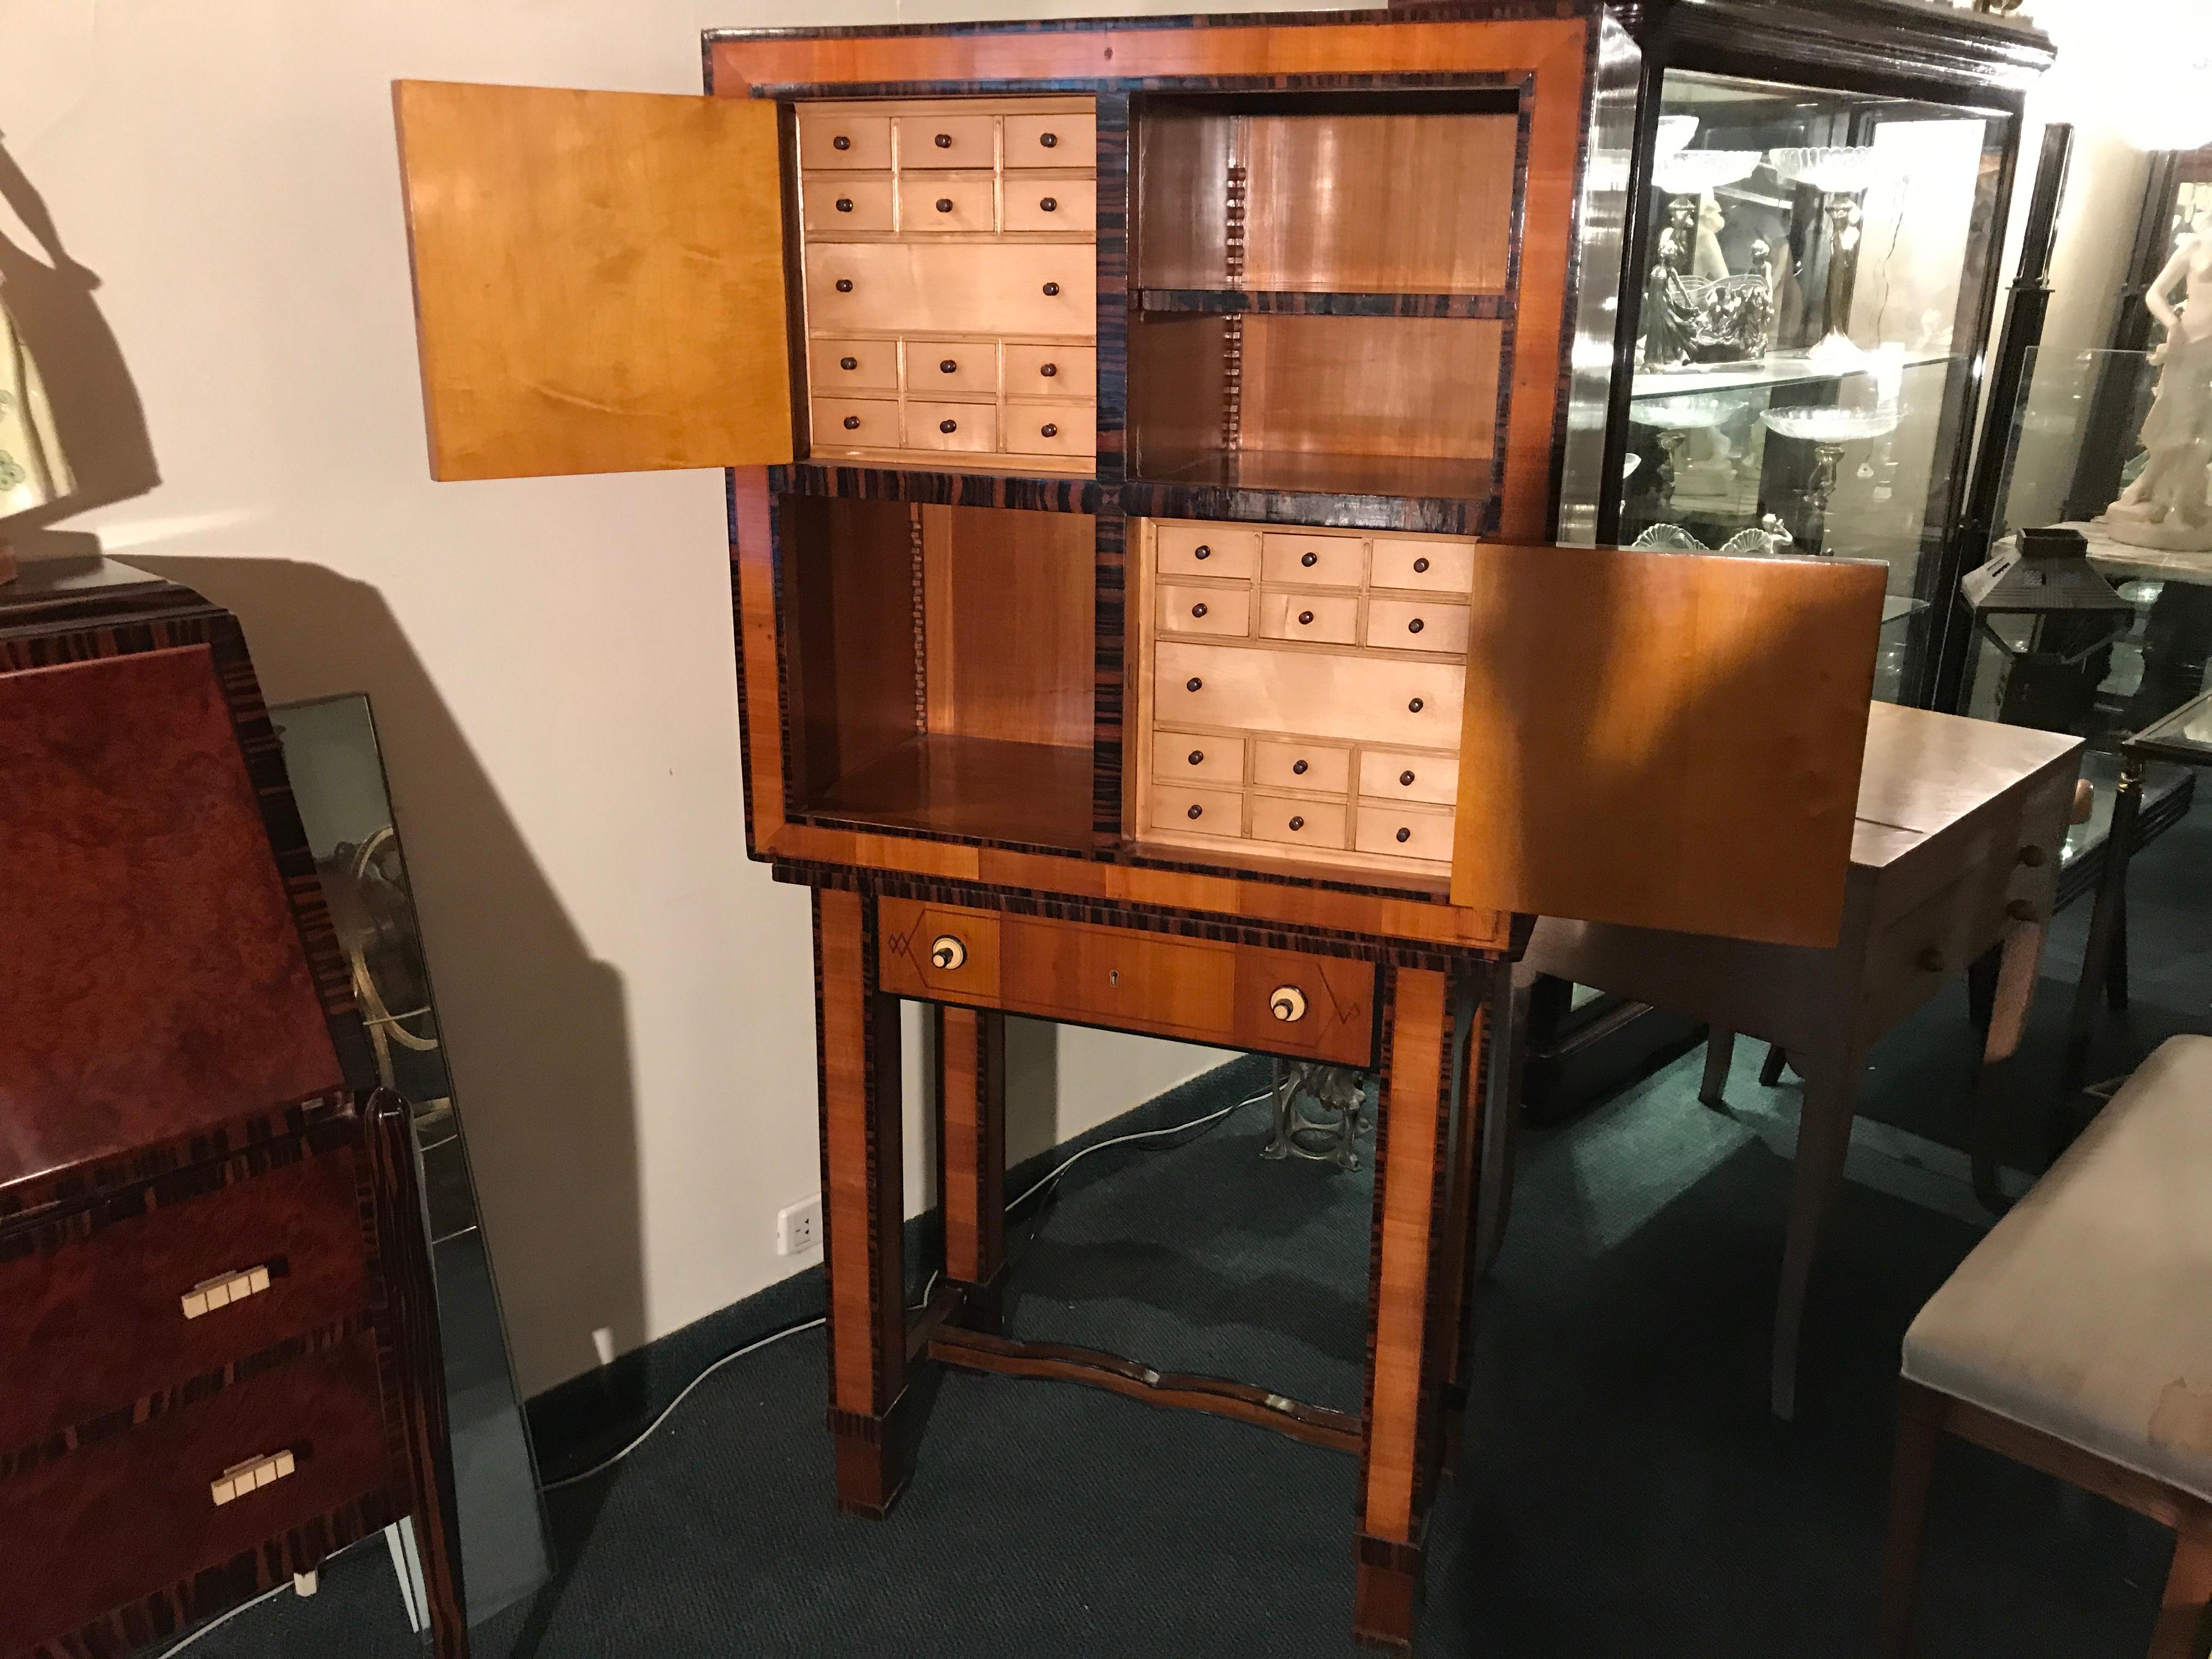 Vienna Secession Furniture for Havana Cigars, Puros, Attributed to Koloman Moser and Werkstatte For Sale